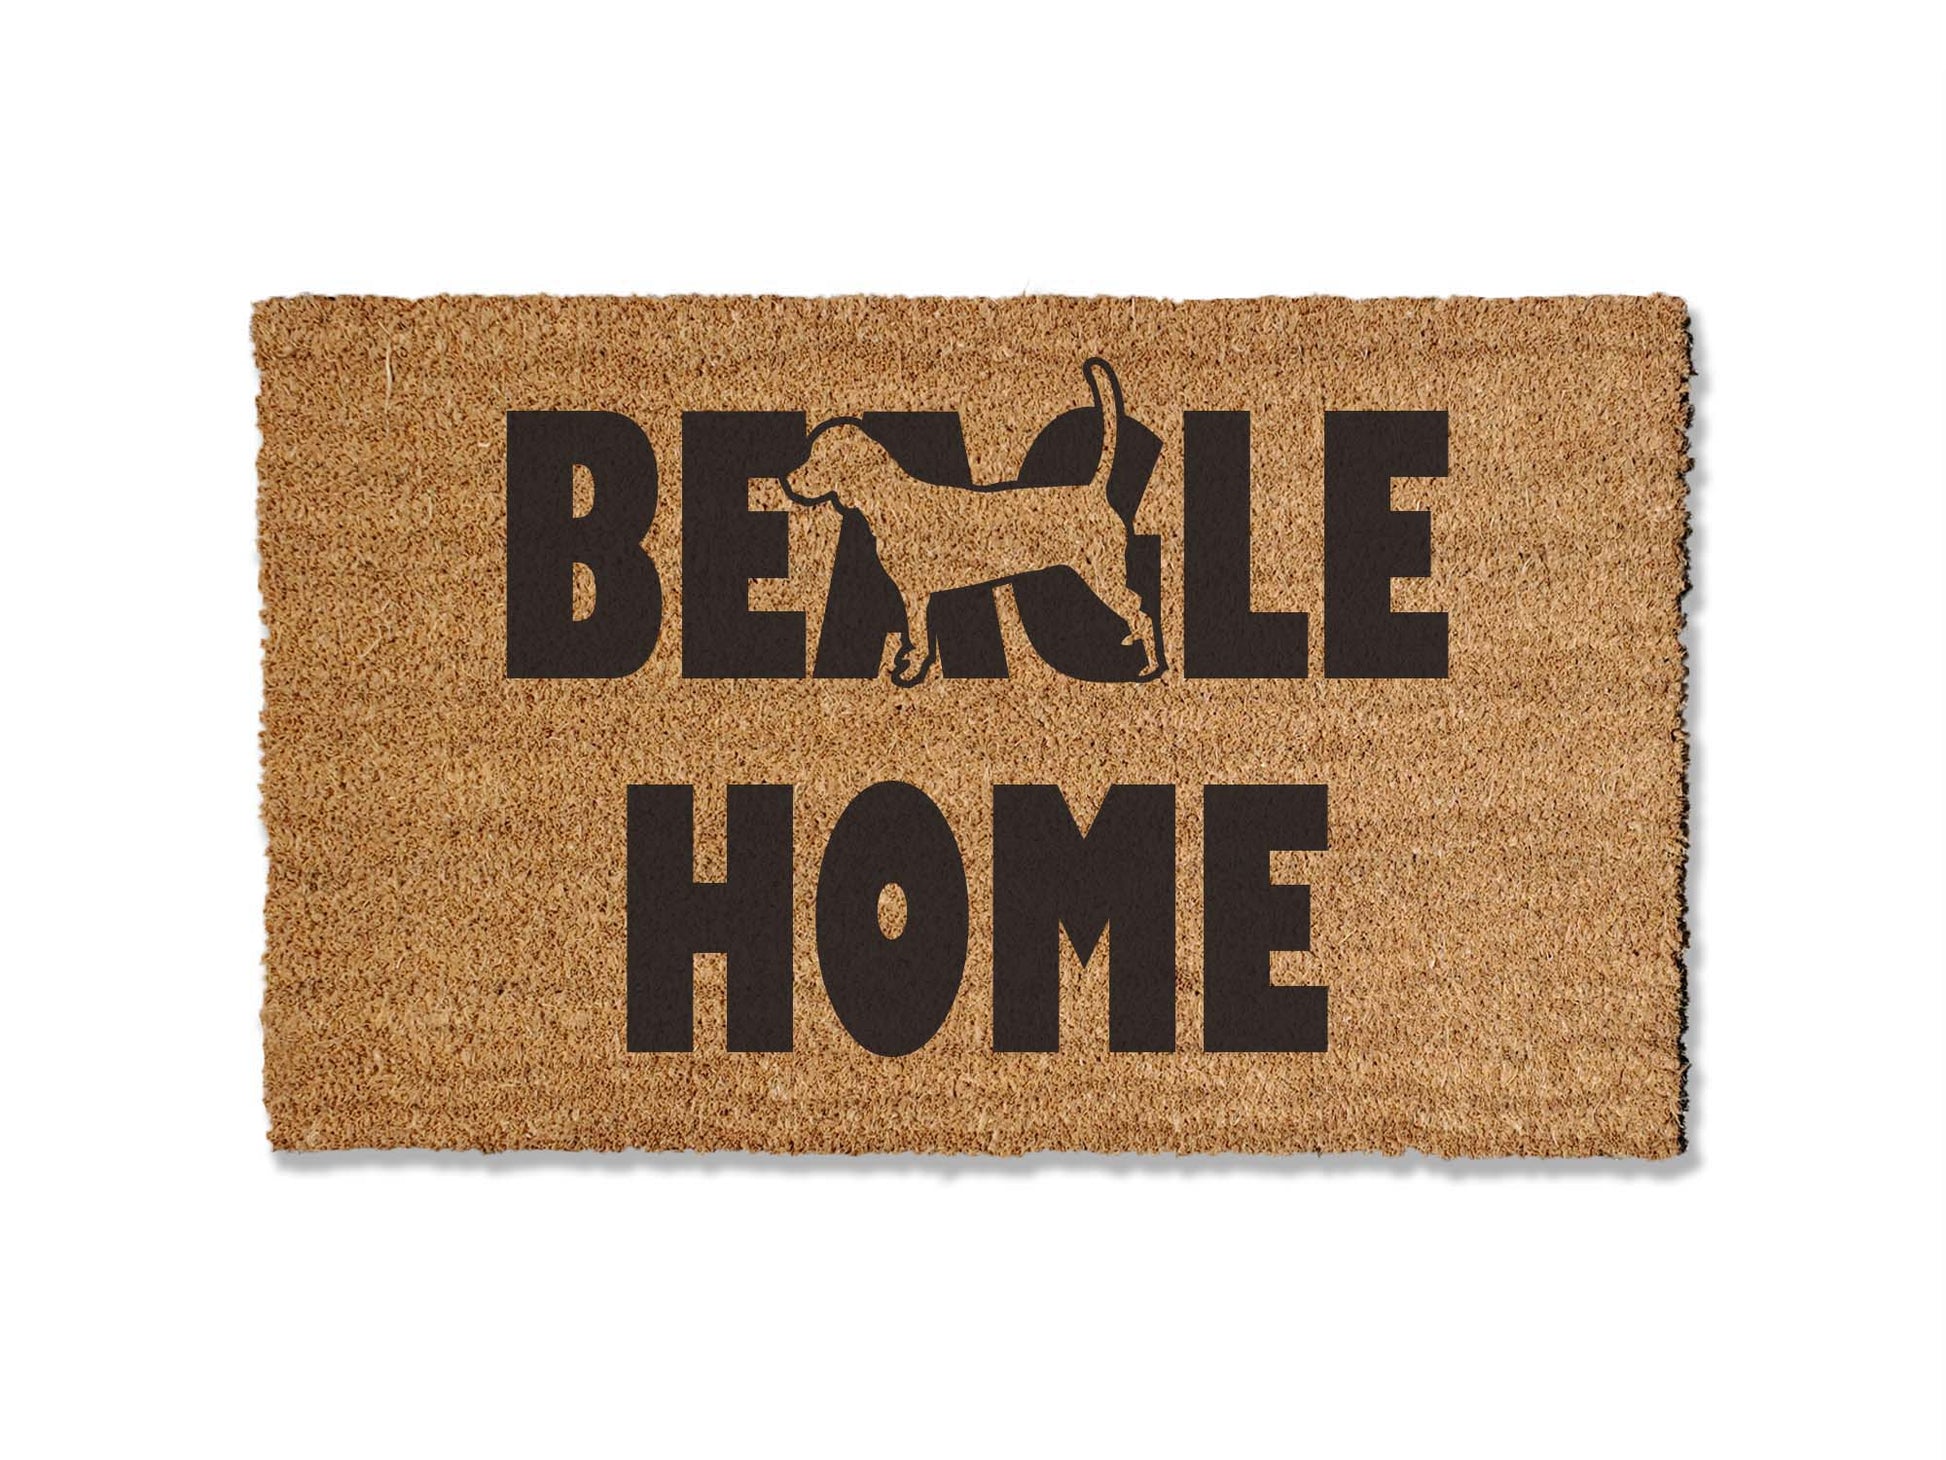 A coir doormat that is 18 inches by 30 inches what the text BEAGLE HOME on it and the silhouette of a beagle.